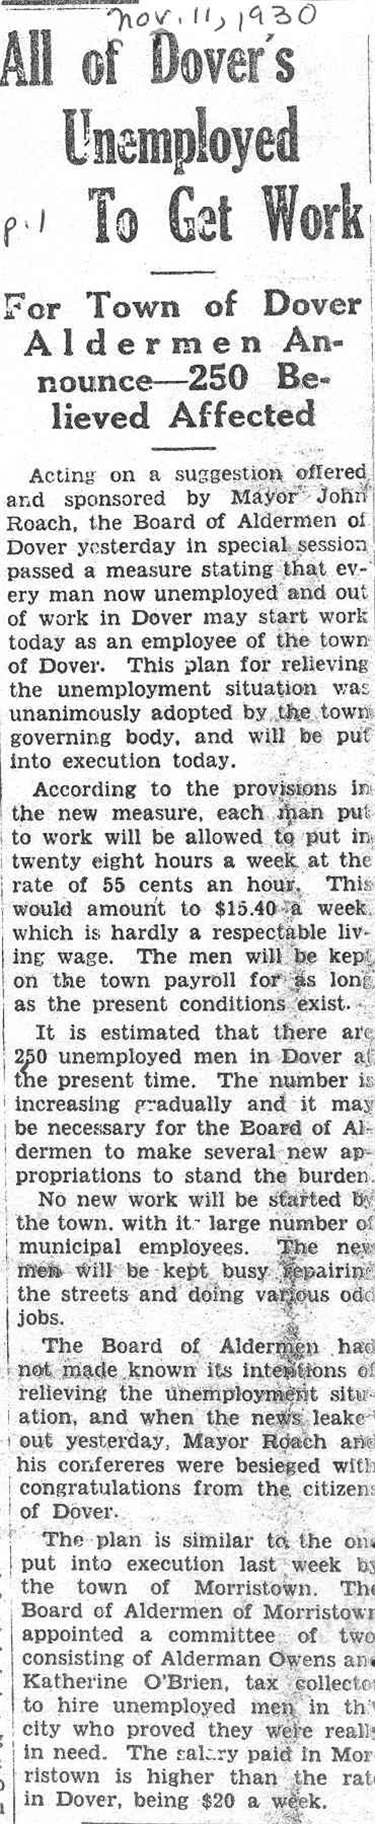 November 11, 1930: All of Dover's Unemployed to Get Work